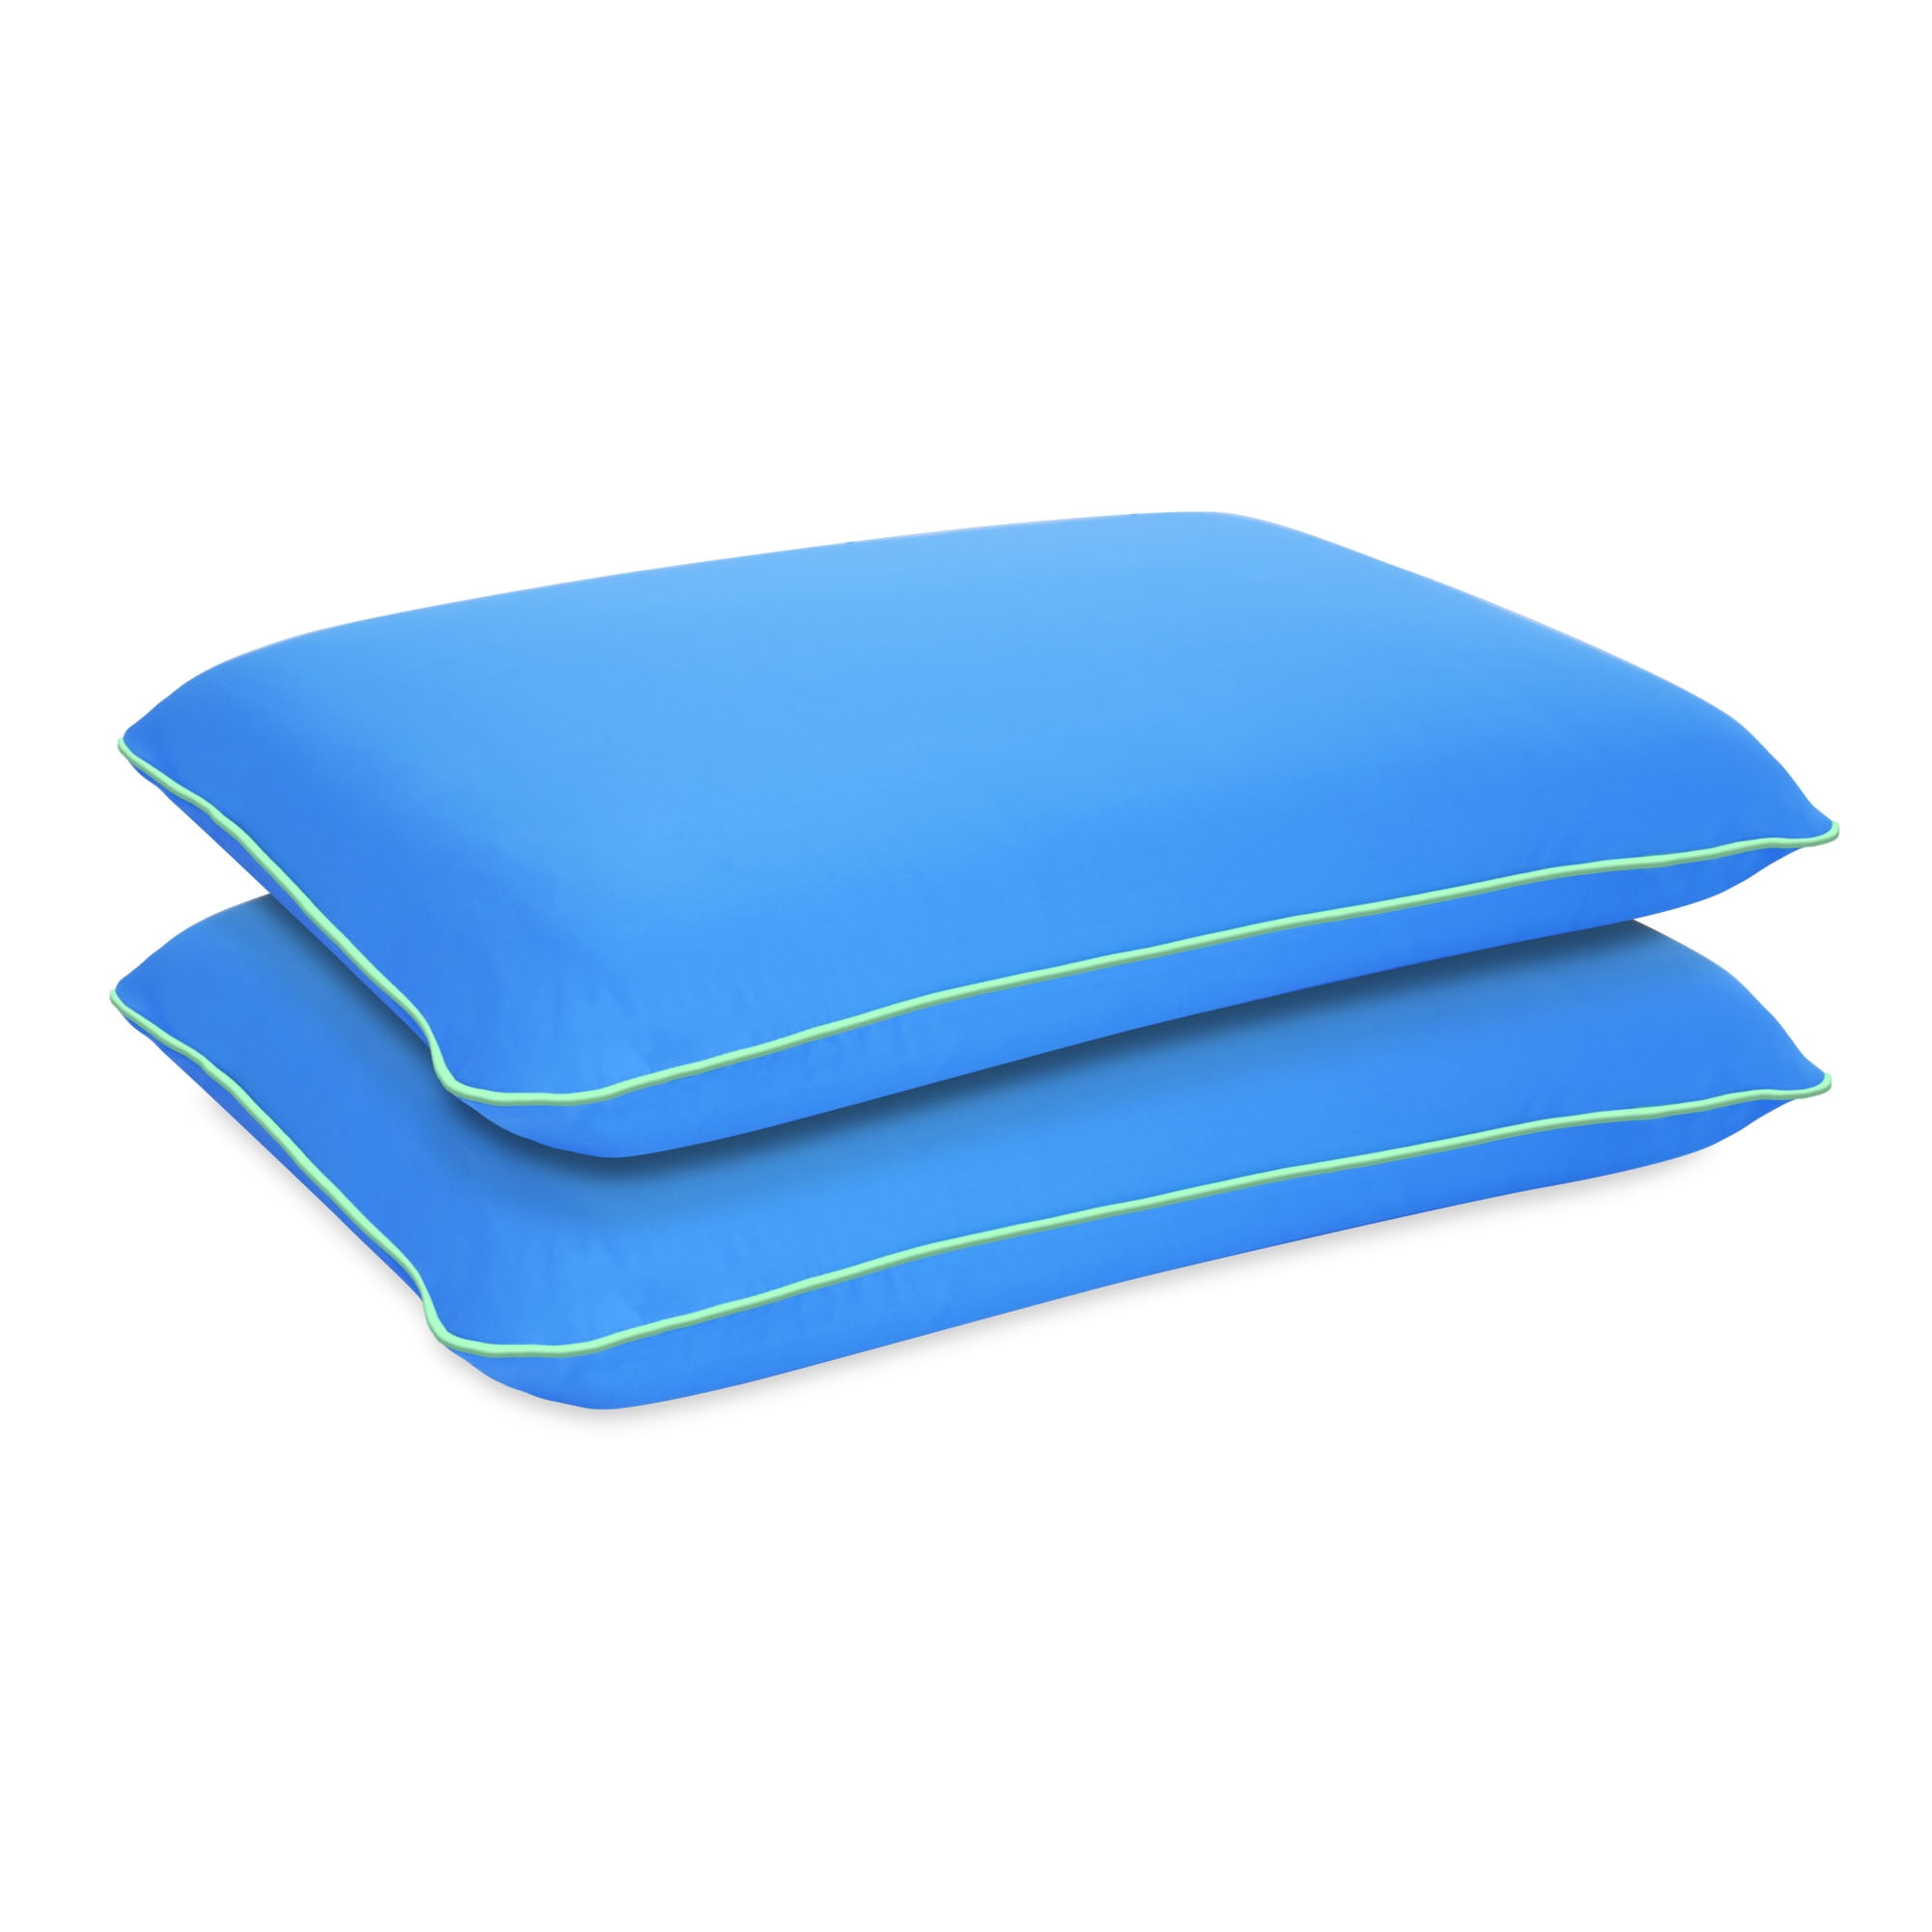 Set of 2 Imaginarium Memory Foam Fun Pillow with Cool-to-the-Touch Cover 